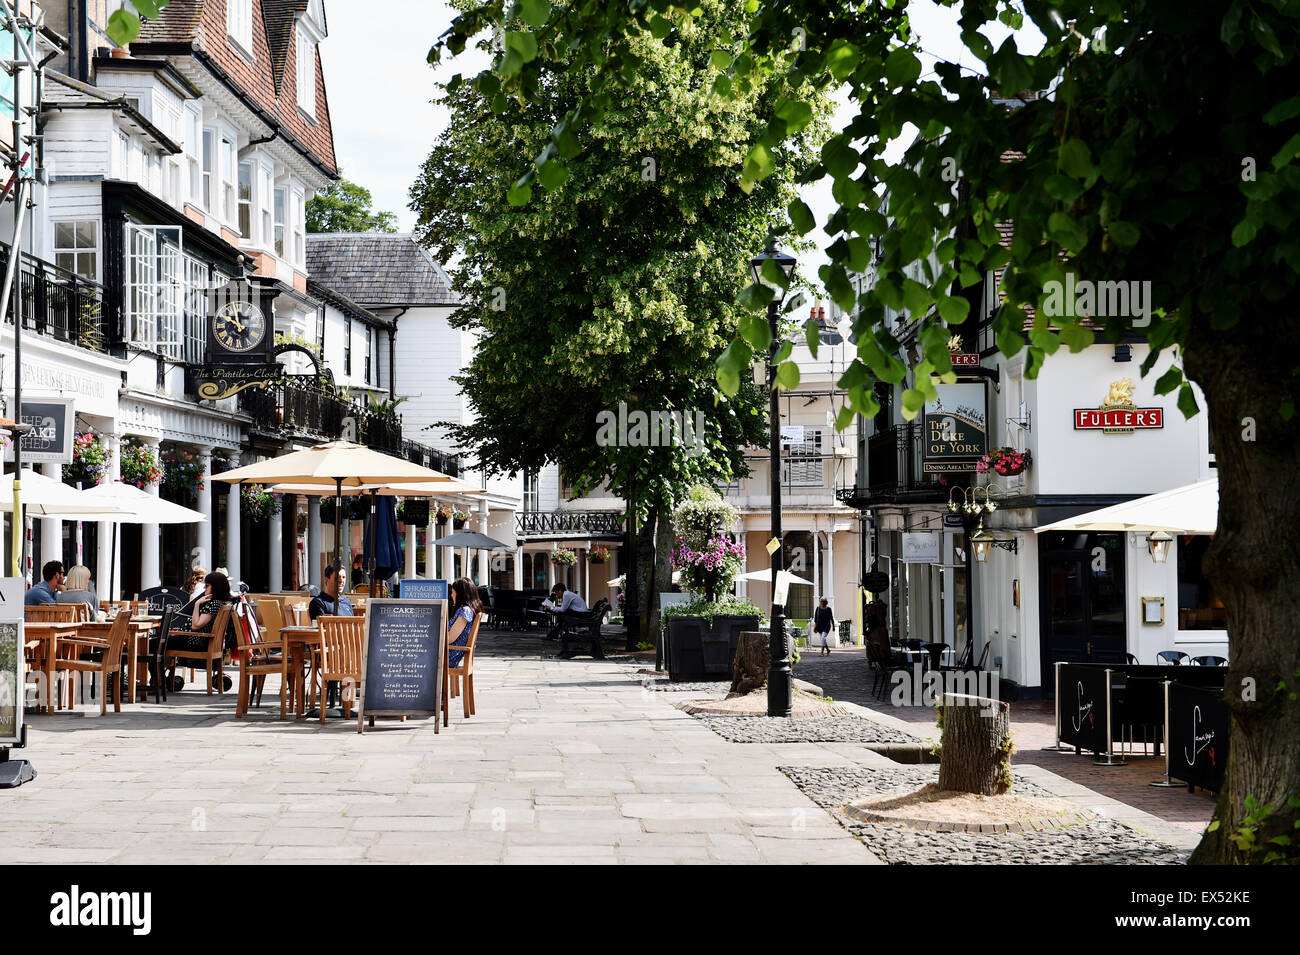 The chic Pantiles district of Royal Tunbridge Wells Kent England UK with its smart cafes shops and bars Stock Photo